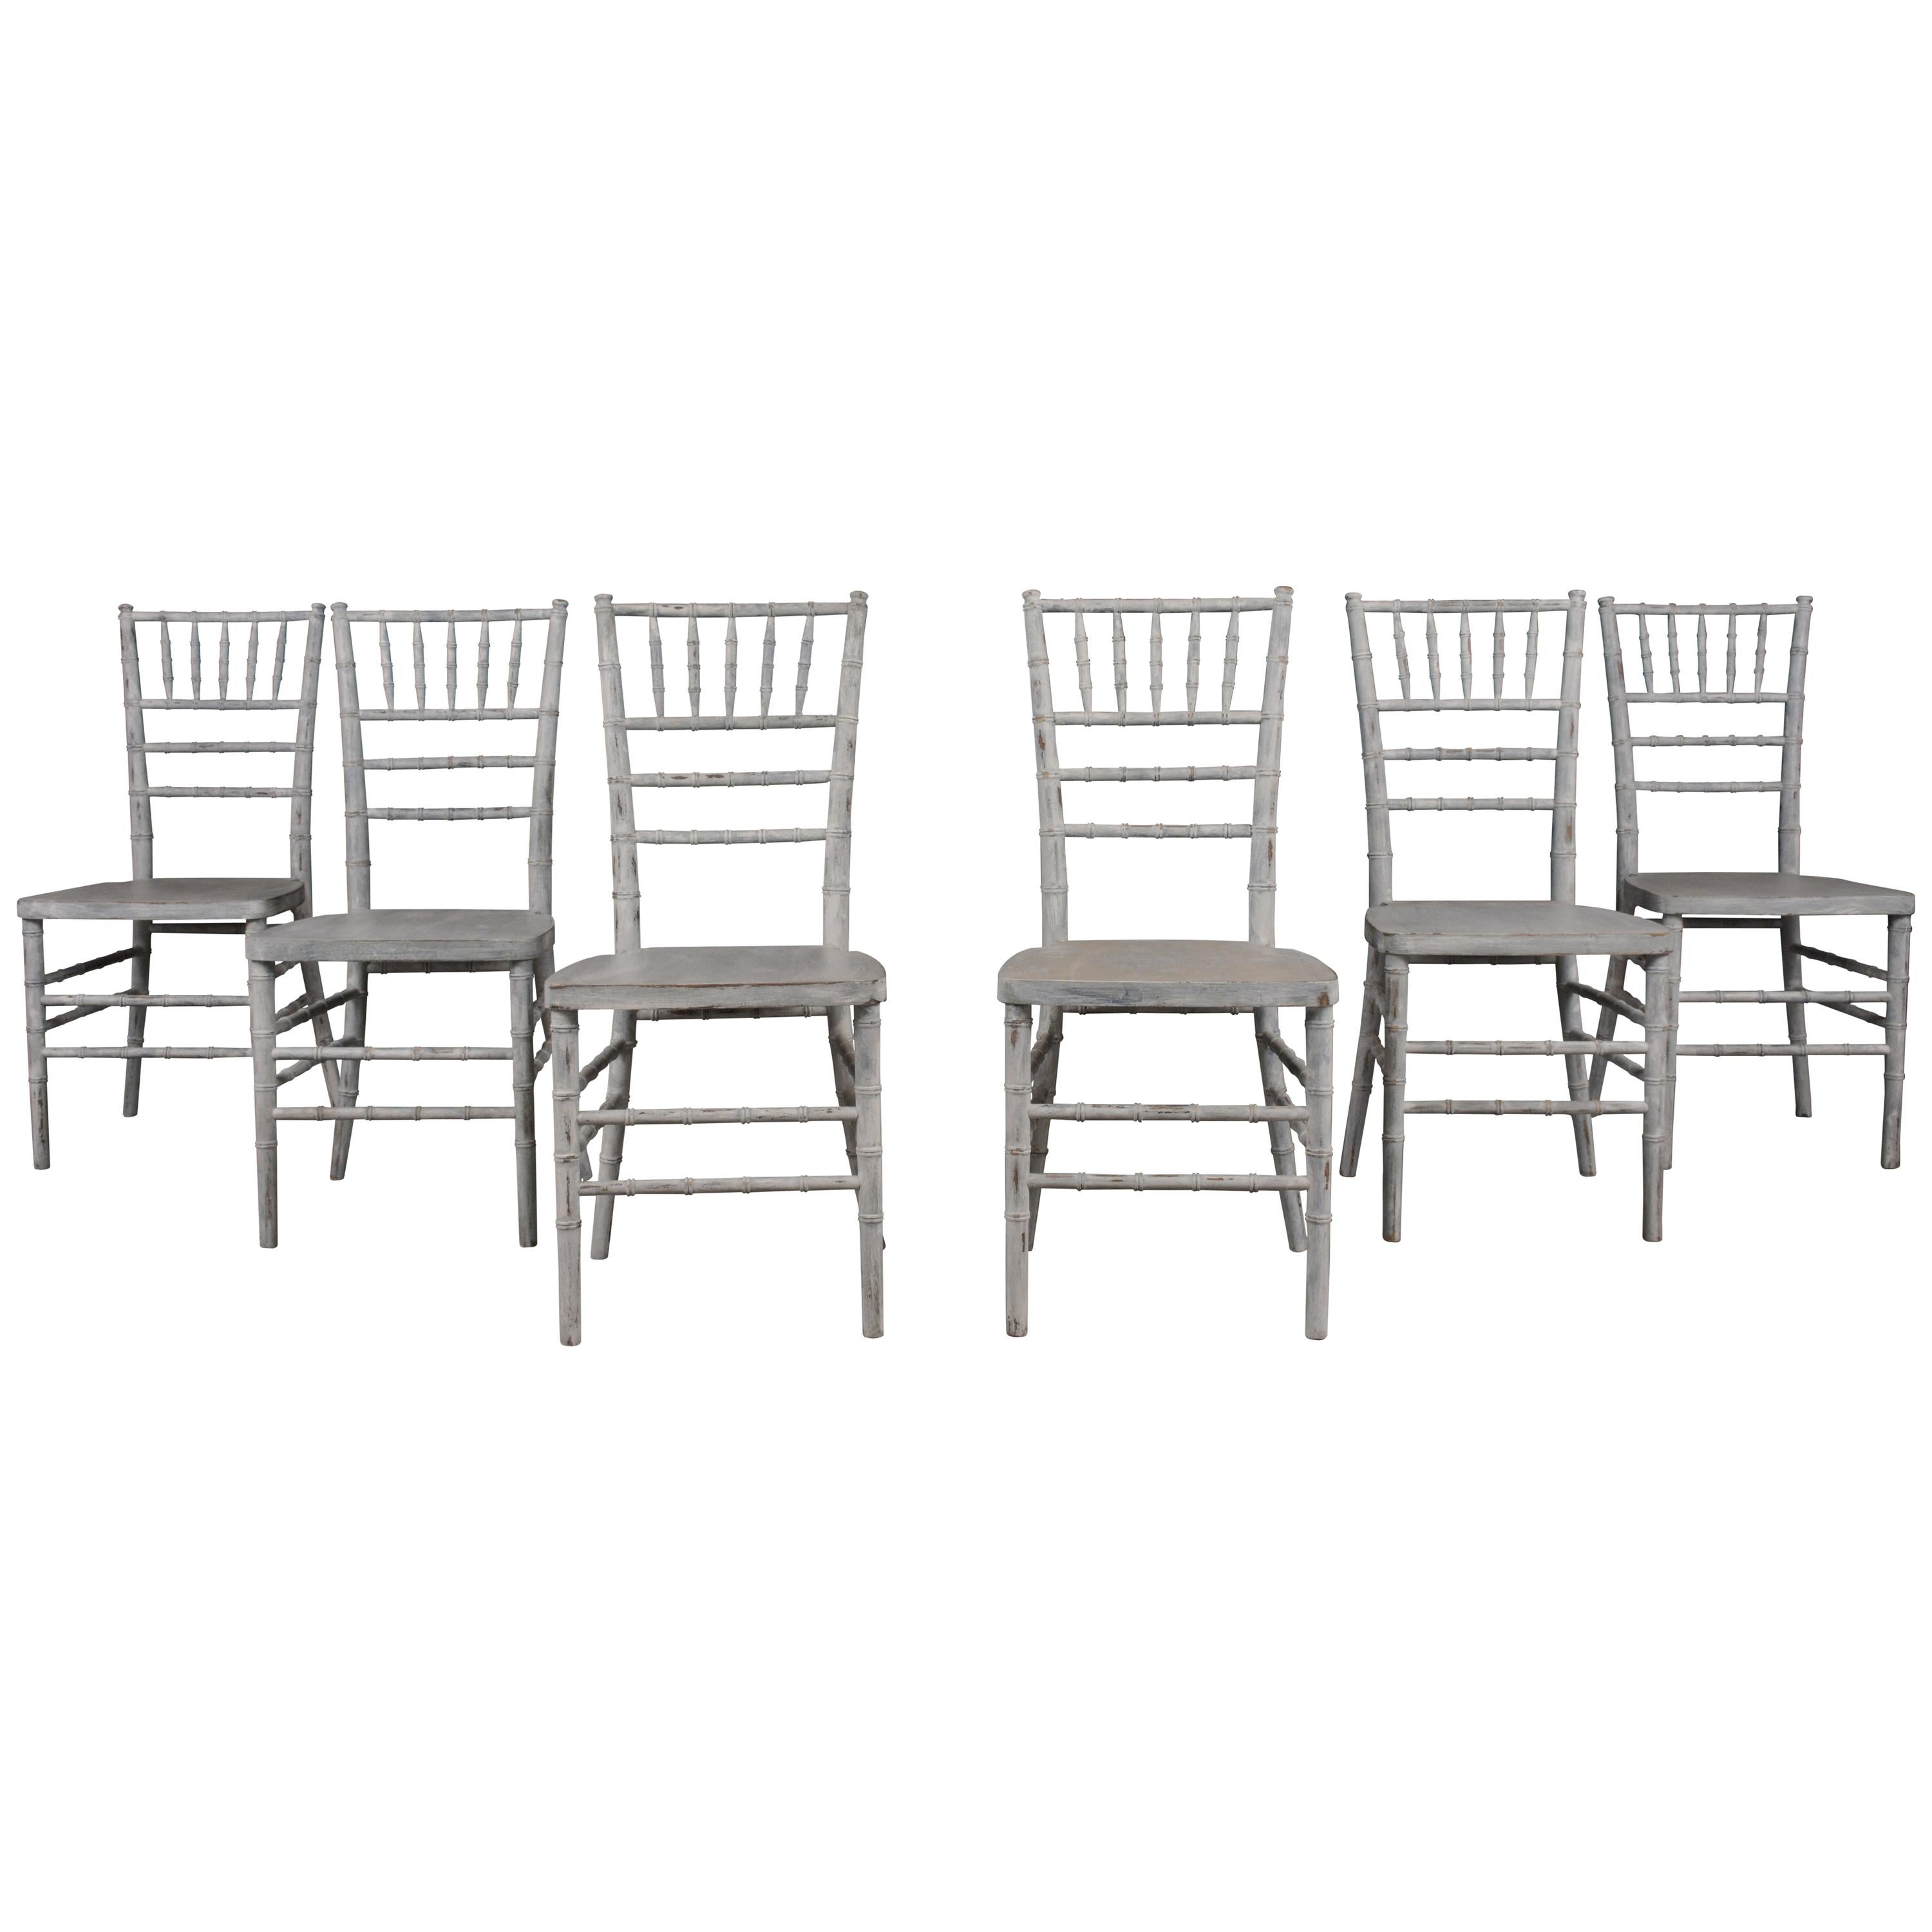 Set of Faux Bamboo Dining Chairs